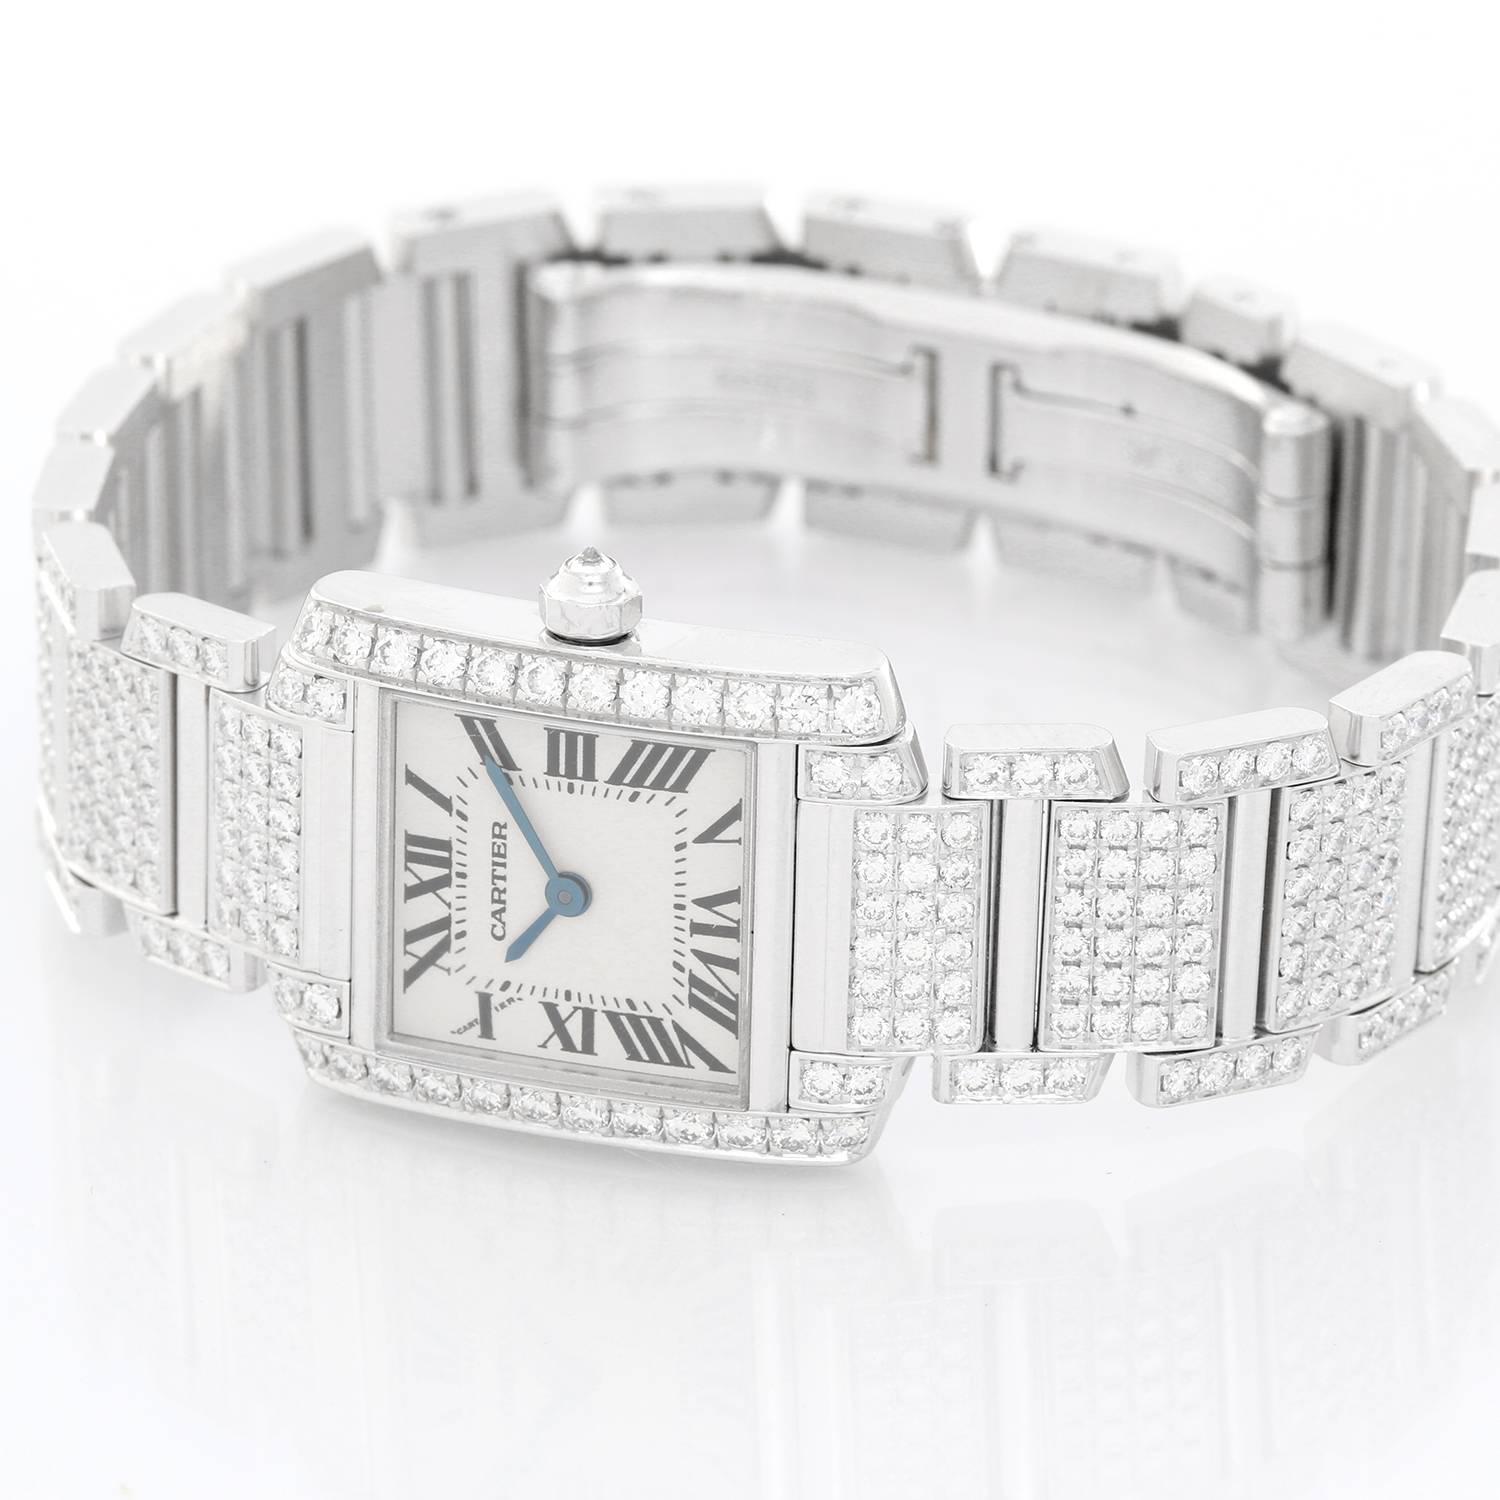 Cartier Ladies White Gold and Diamonds Tank Francaise WE1002SD -  Quartz. 18k White gold with diamonds, 20mm x 25mm. Ivory colored with black Roman numerals; sapphire crystal. 18k White Gold and diamonds with deployant clasp. Pre-owned with diamond